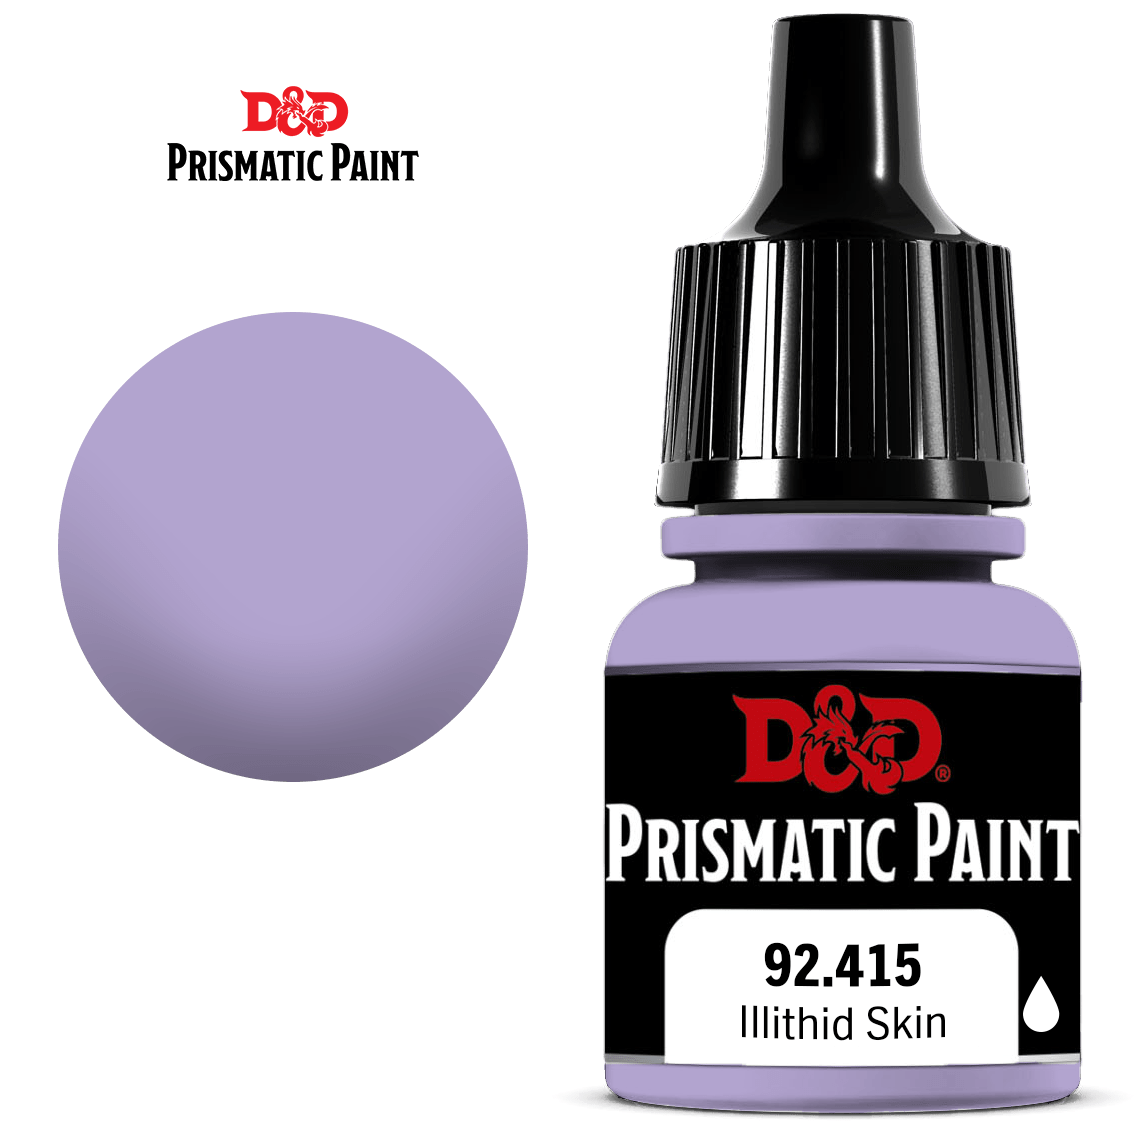 PRISMATIC PAINT: ILLITHID SKIN | BD Cosmos